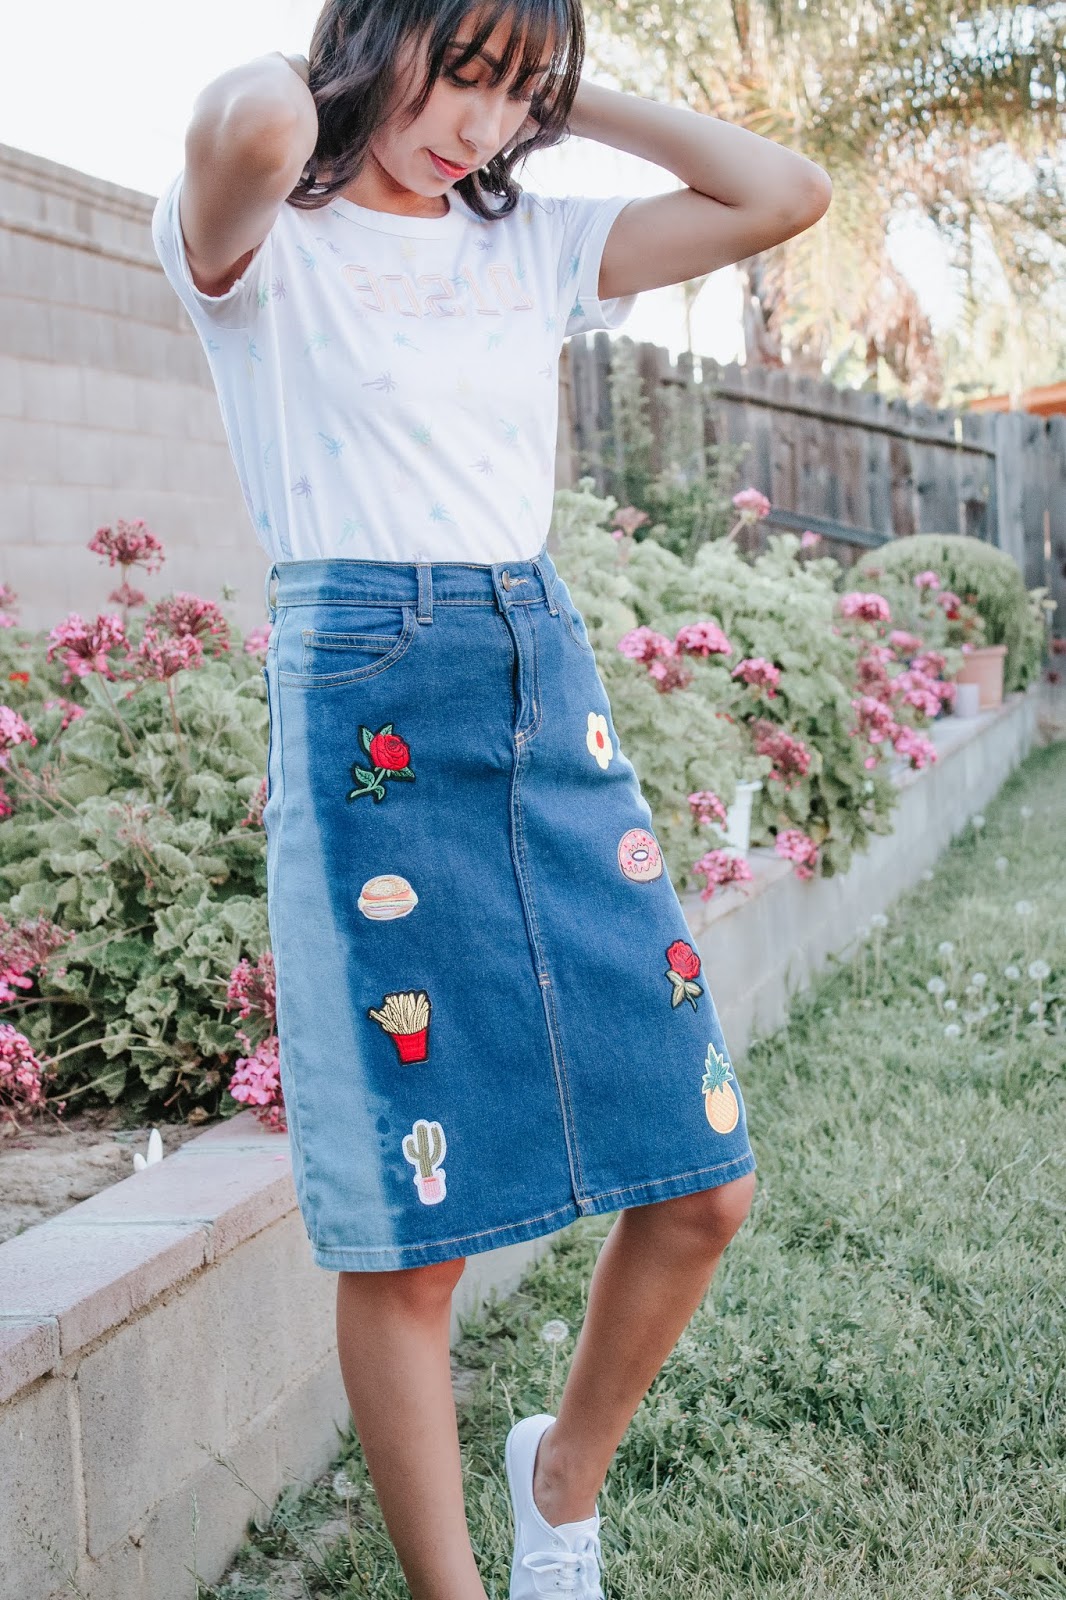 9 Creative Ways To Turn Jeans Into A Skirt - Sew Historically